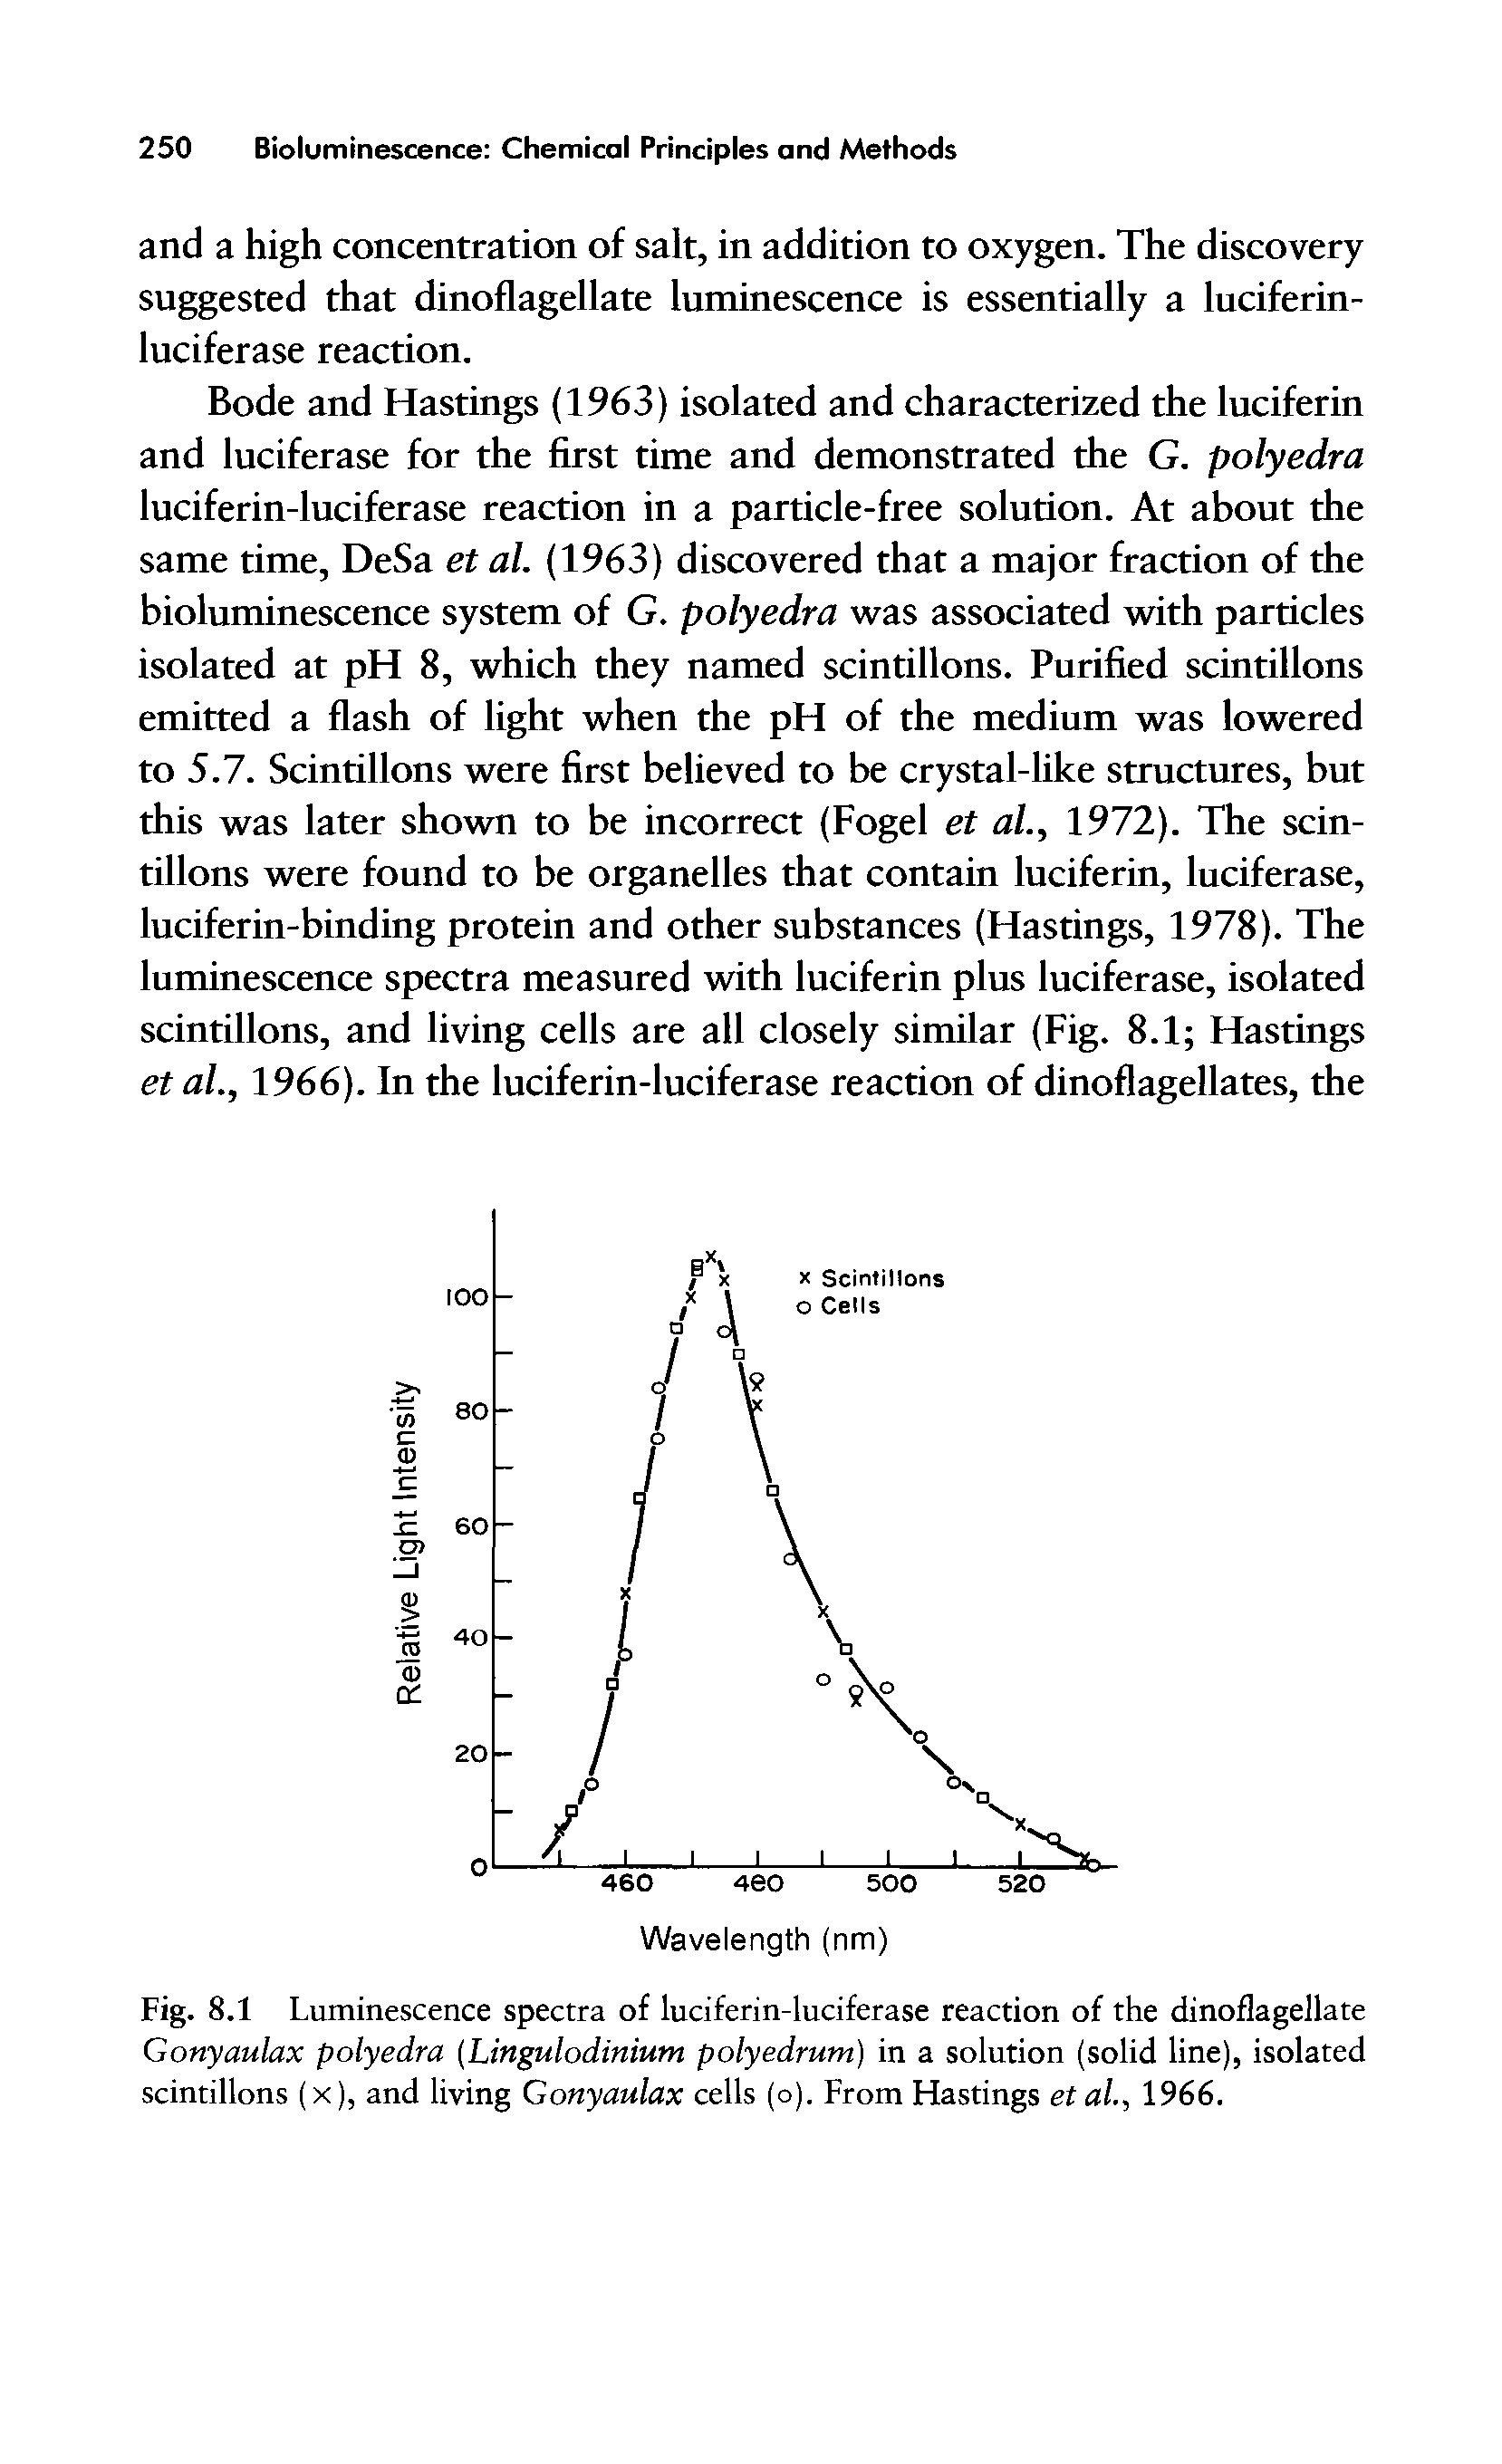 Fig. 8.1 Luminescence spectra of luciferin-luciferase reaction of the dinoflagellate Gonyaulax polyedra (Lingulodinium polyedrum) in a solution (solid line), isolated scintillons (x), and living Gonyaulax cells (o). From Hastings et al., 1966.